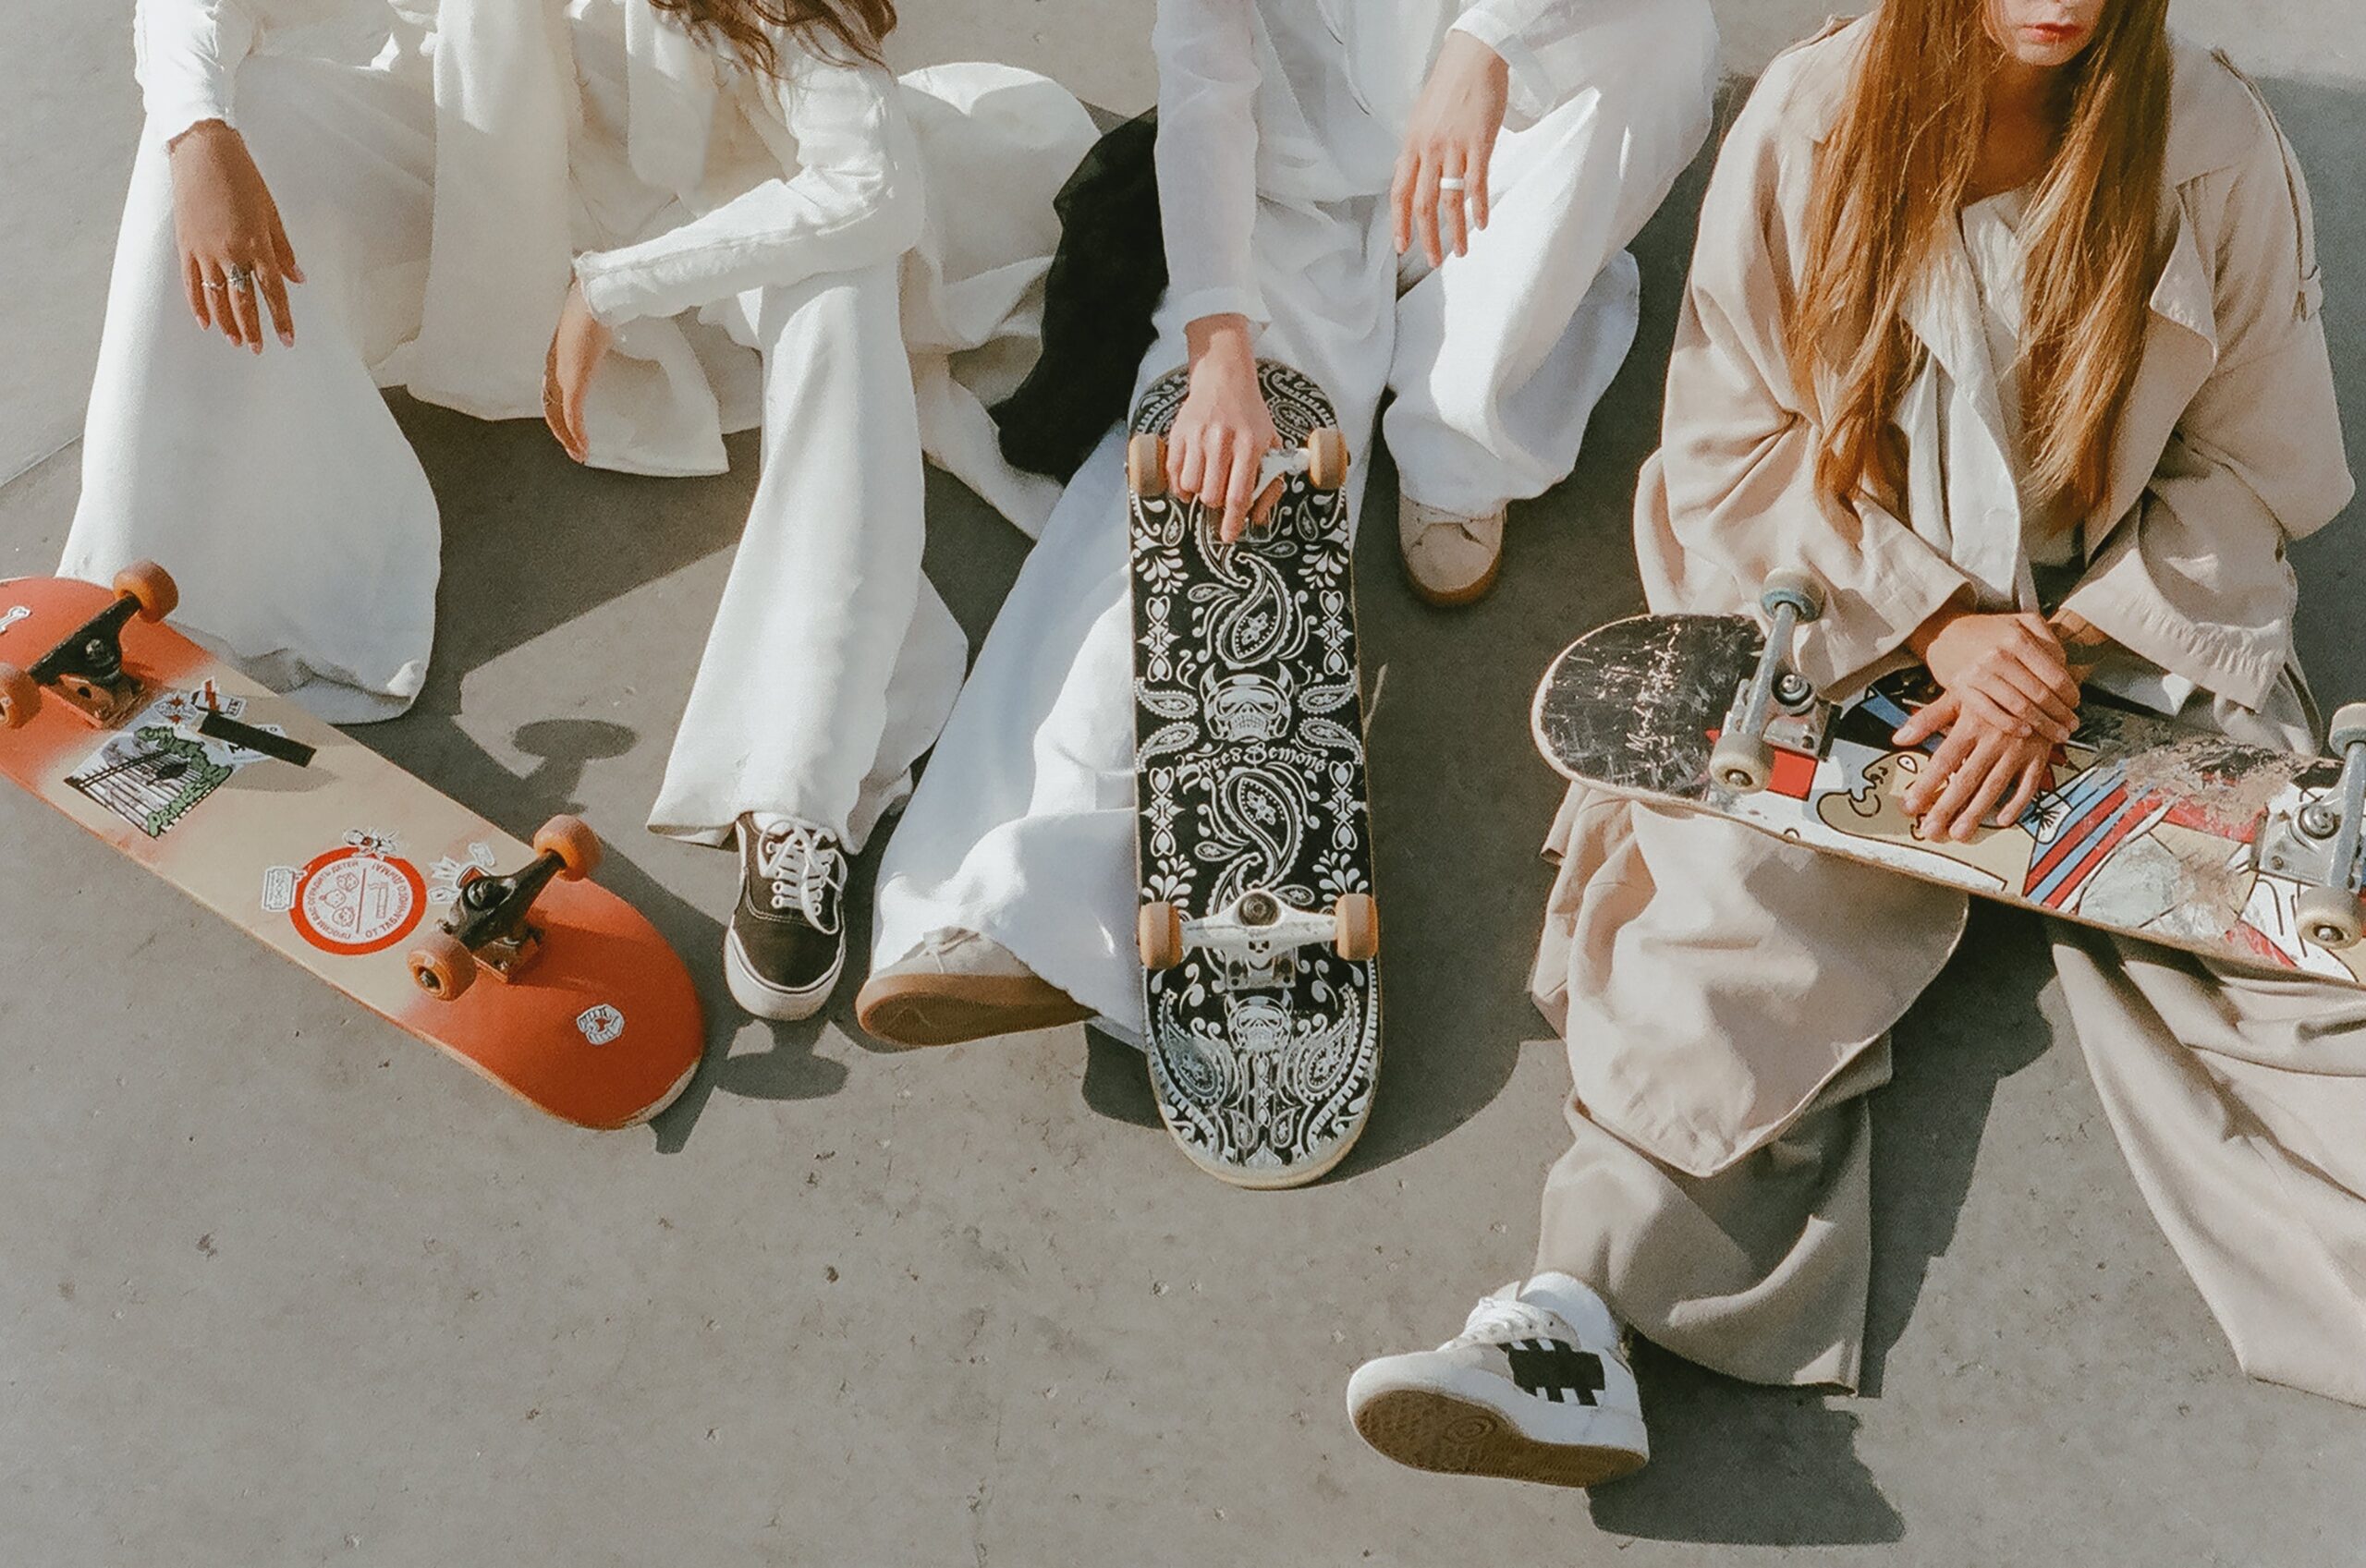 Can You Explain The Factors That Influence The Price Of Skateboard Decks?